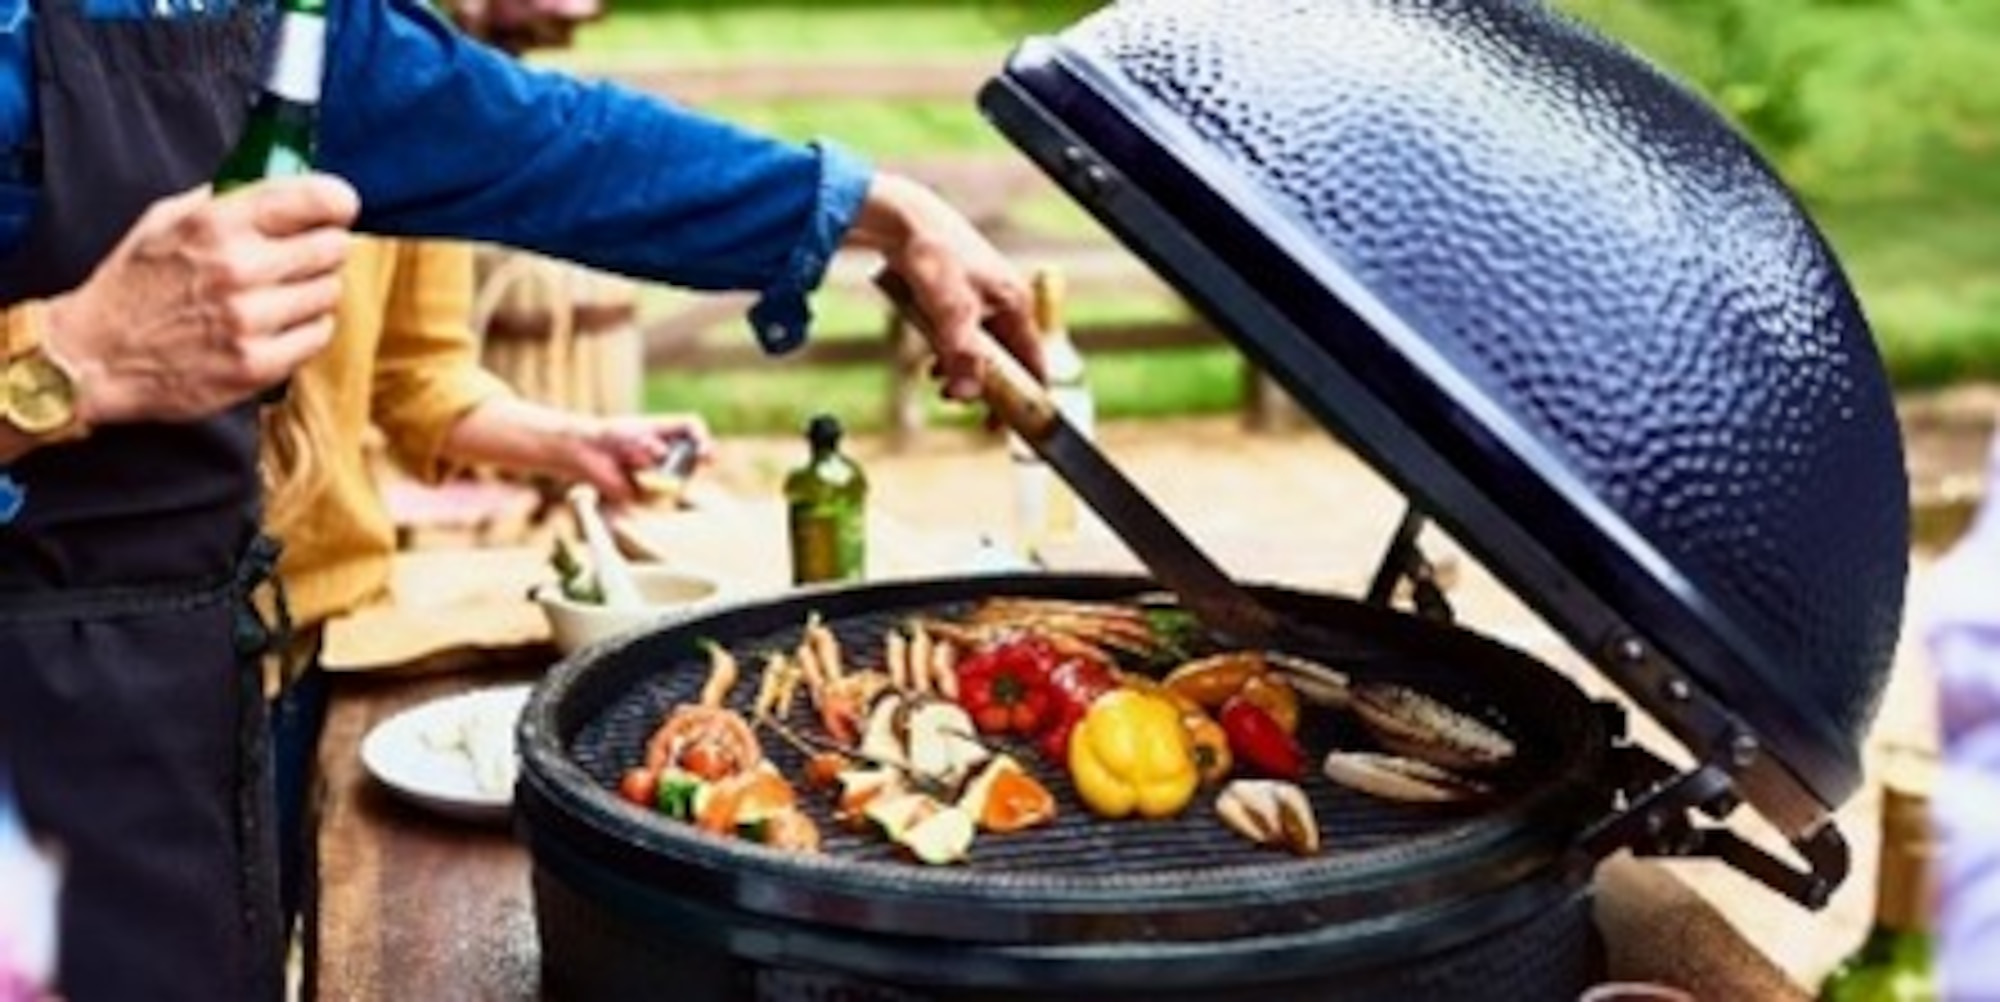 A photo of a person grilling some vegetables and meat.